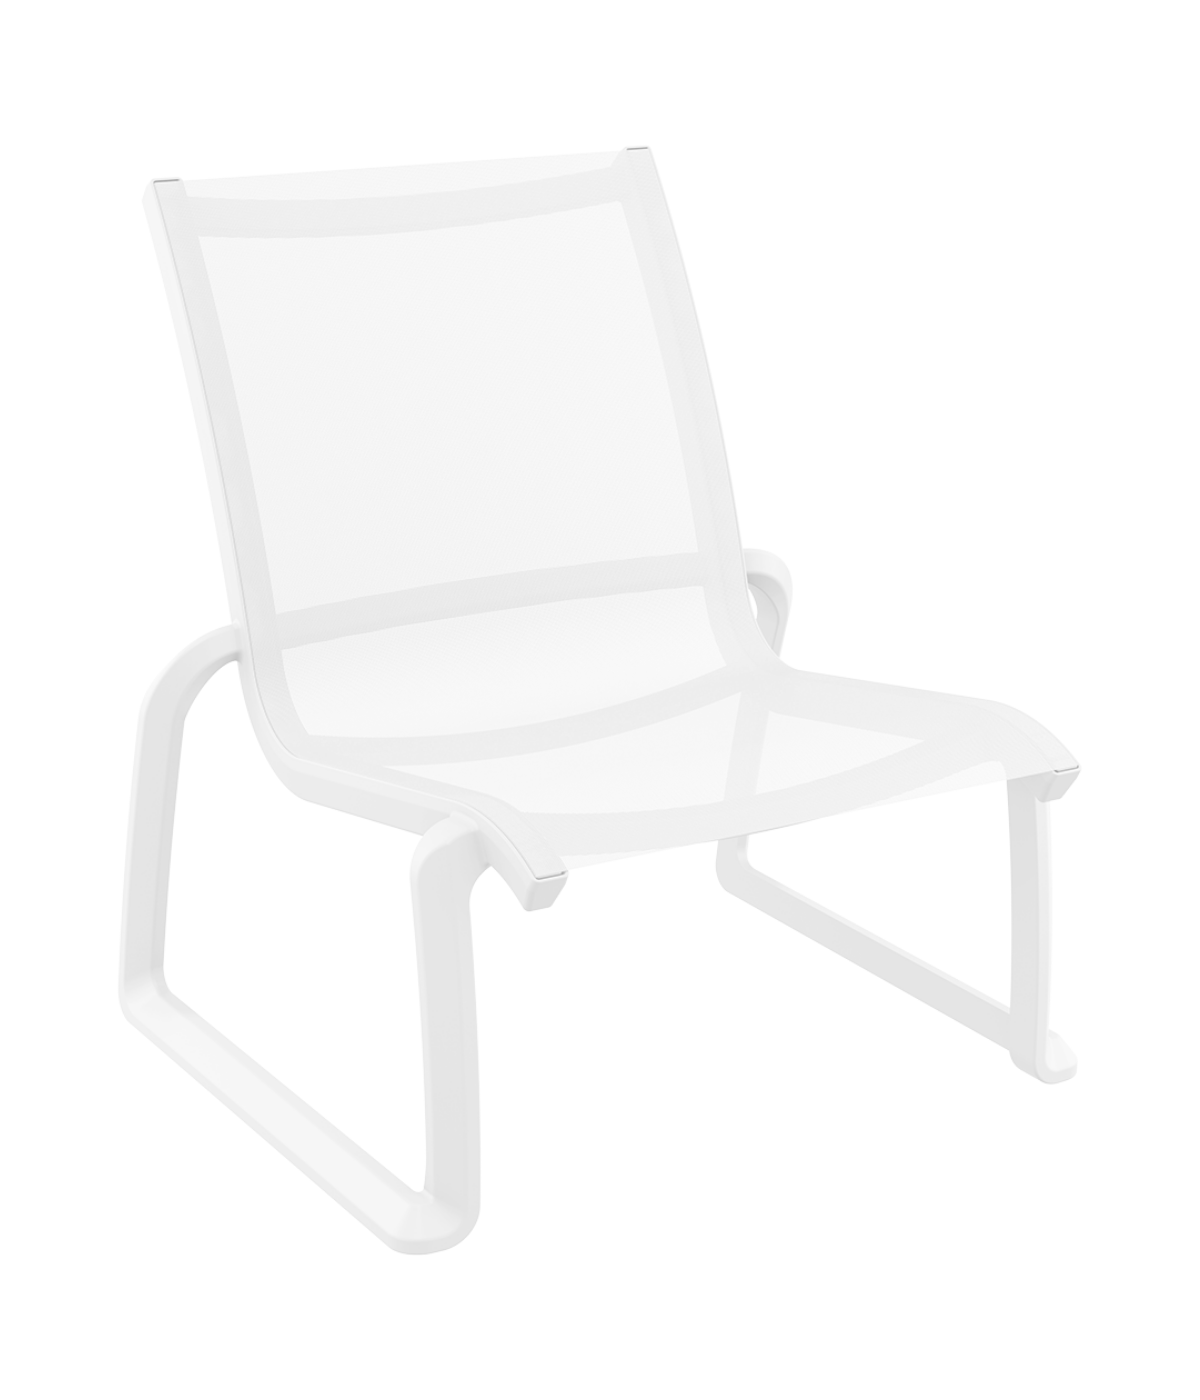 Pacific Lounge Chair